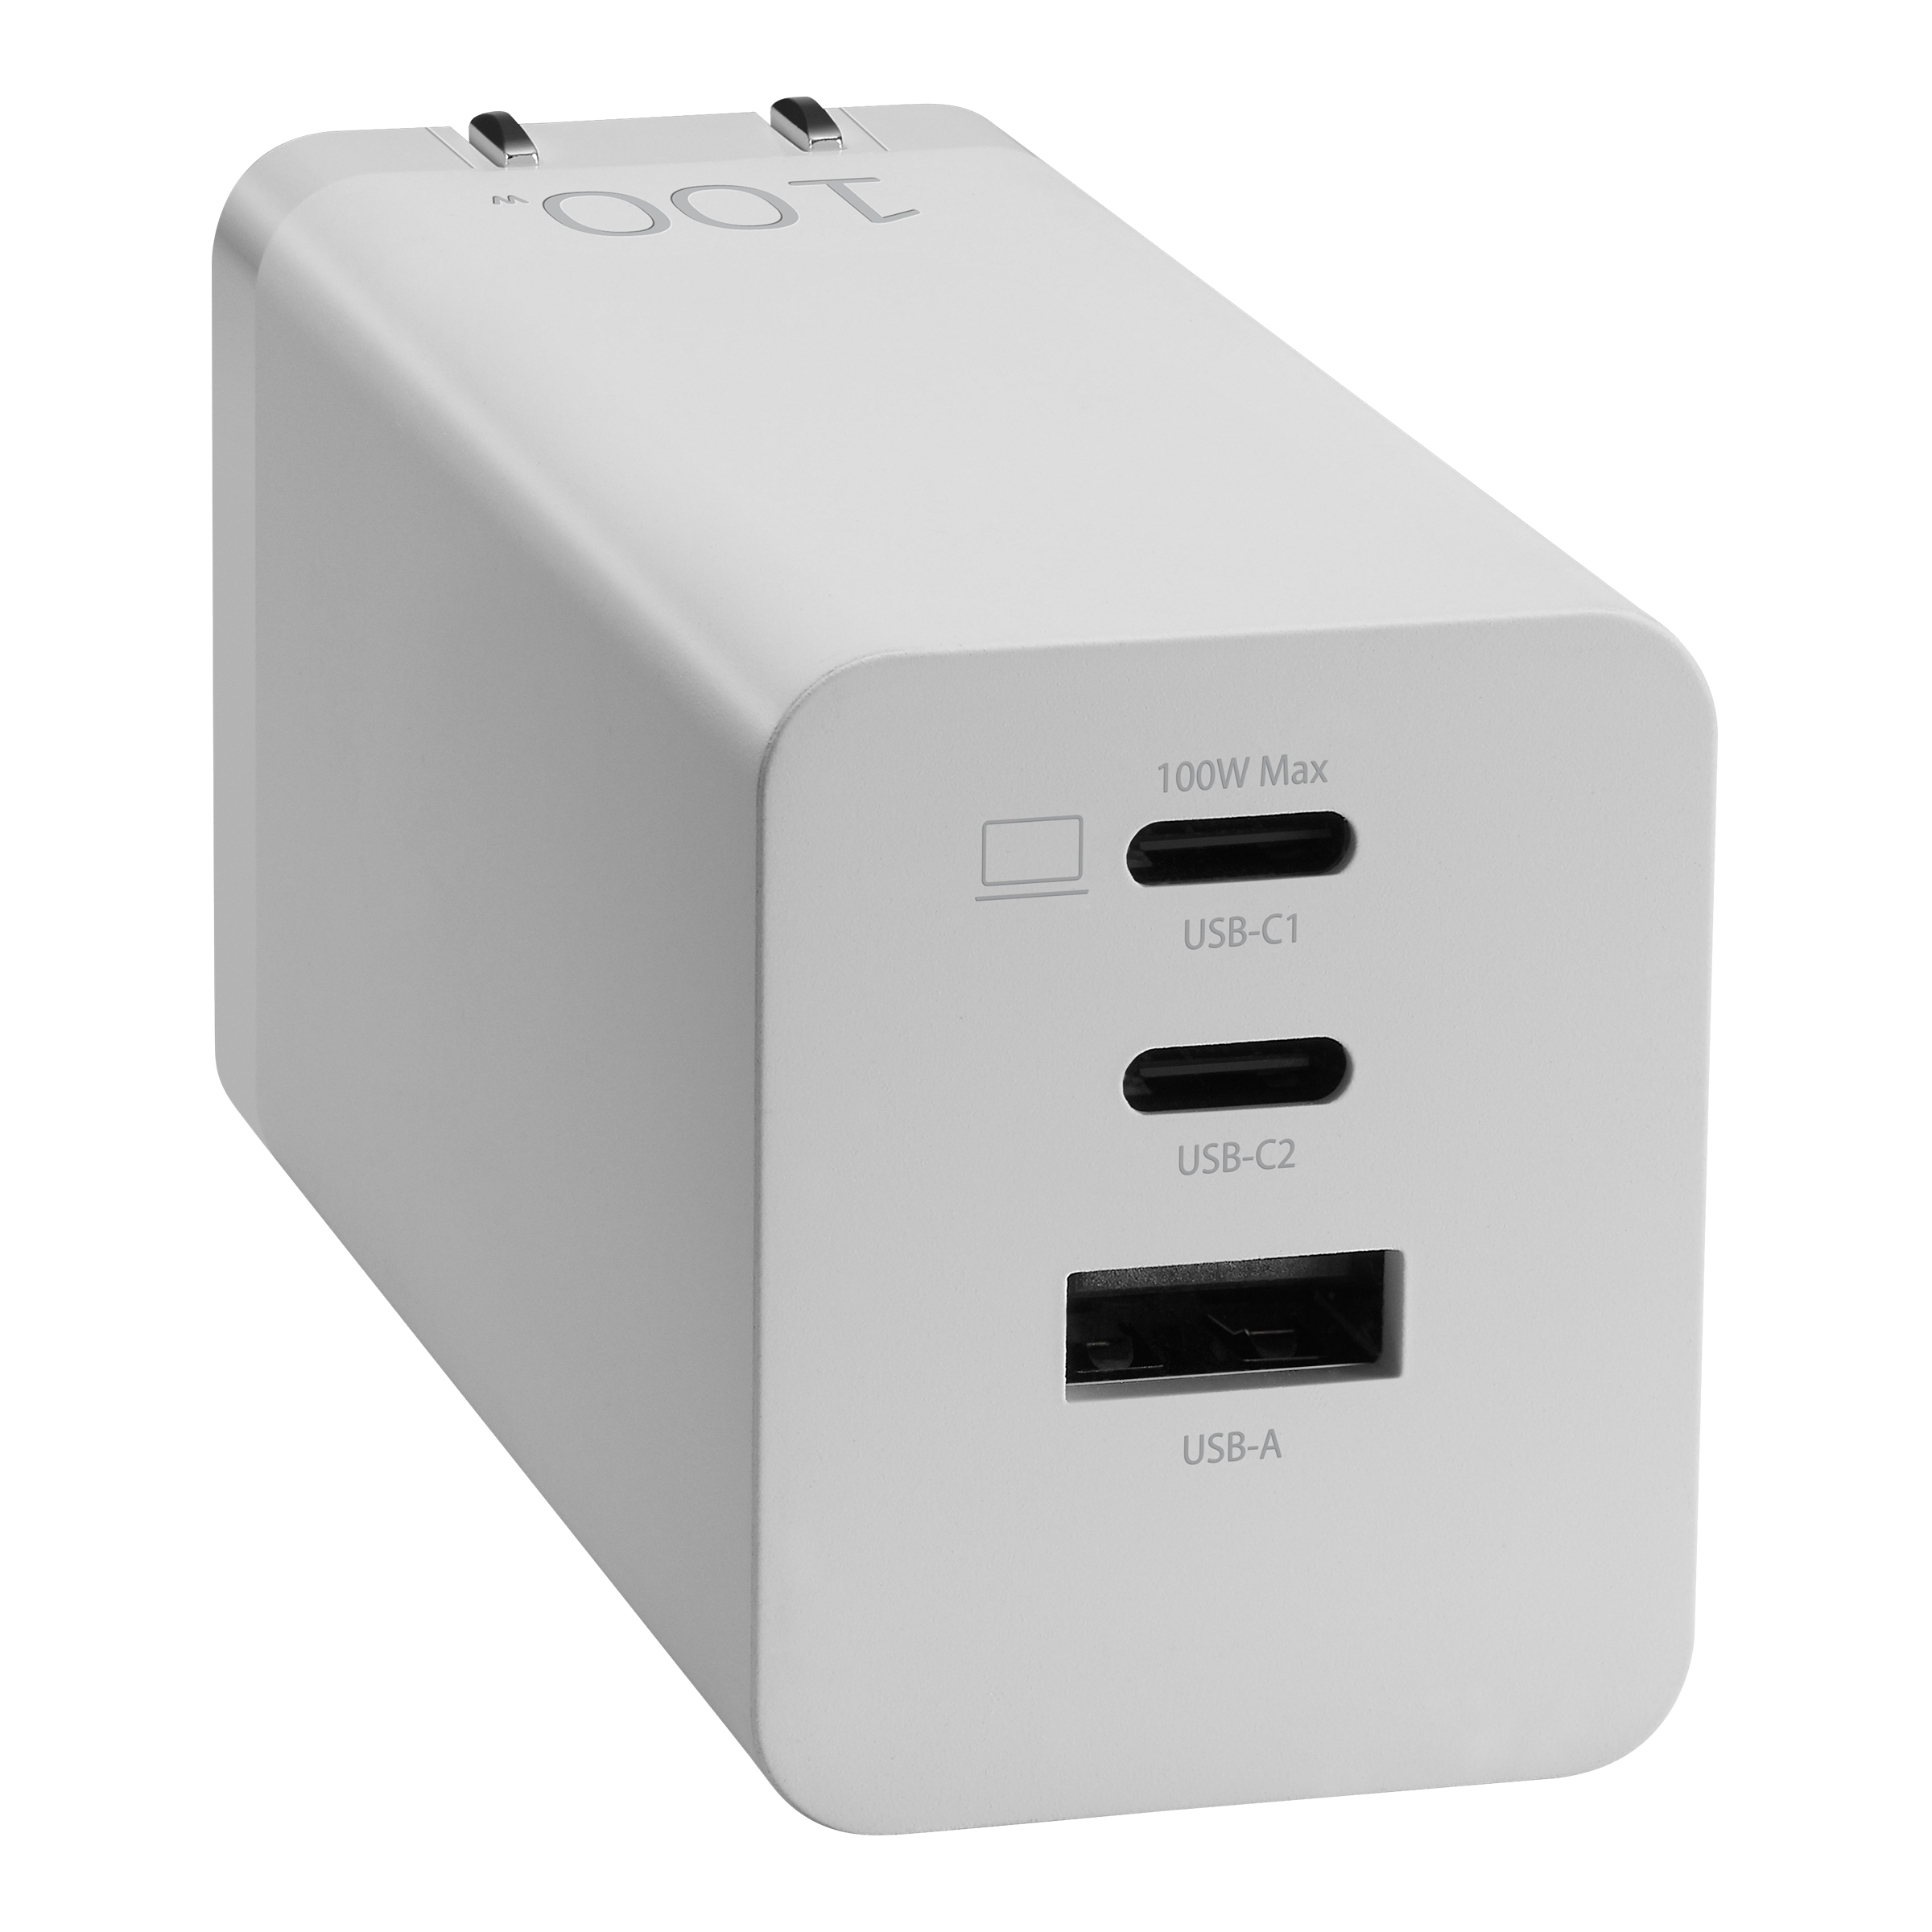 Adapters and Chargers - All series｜ASUS Global